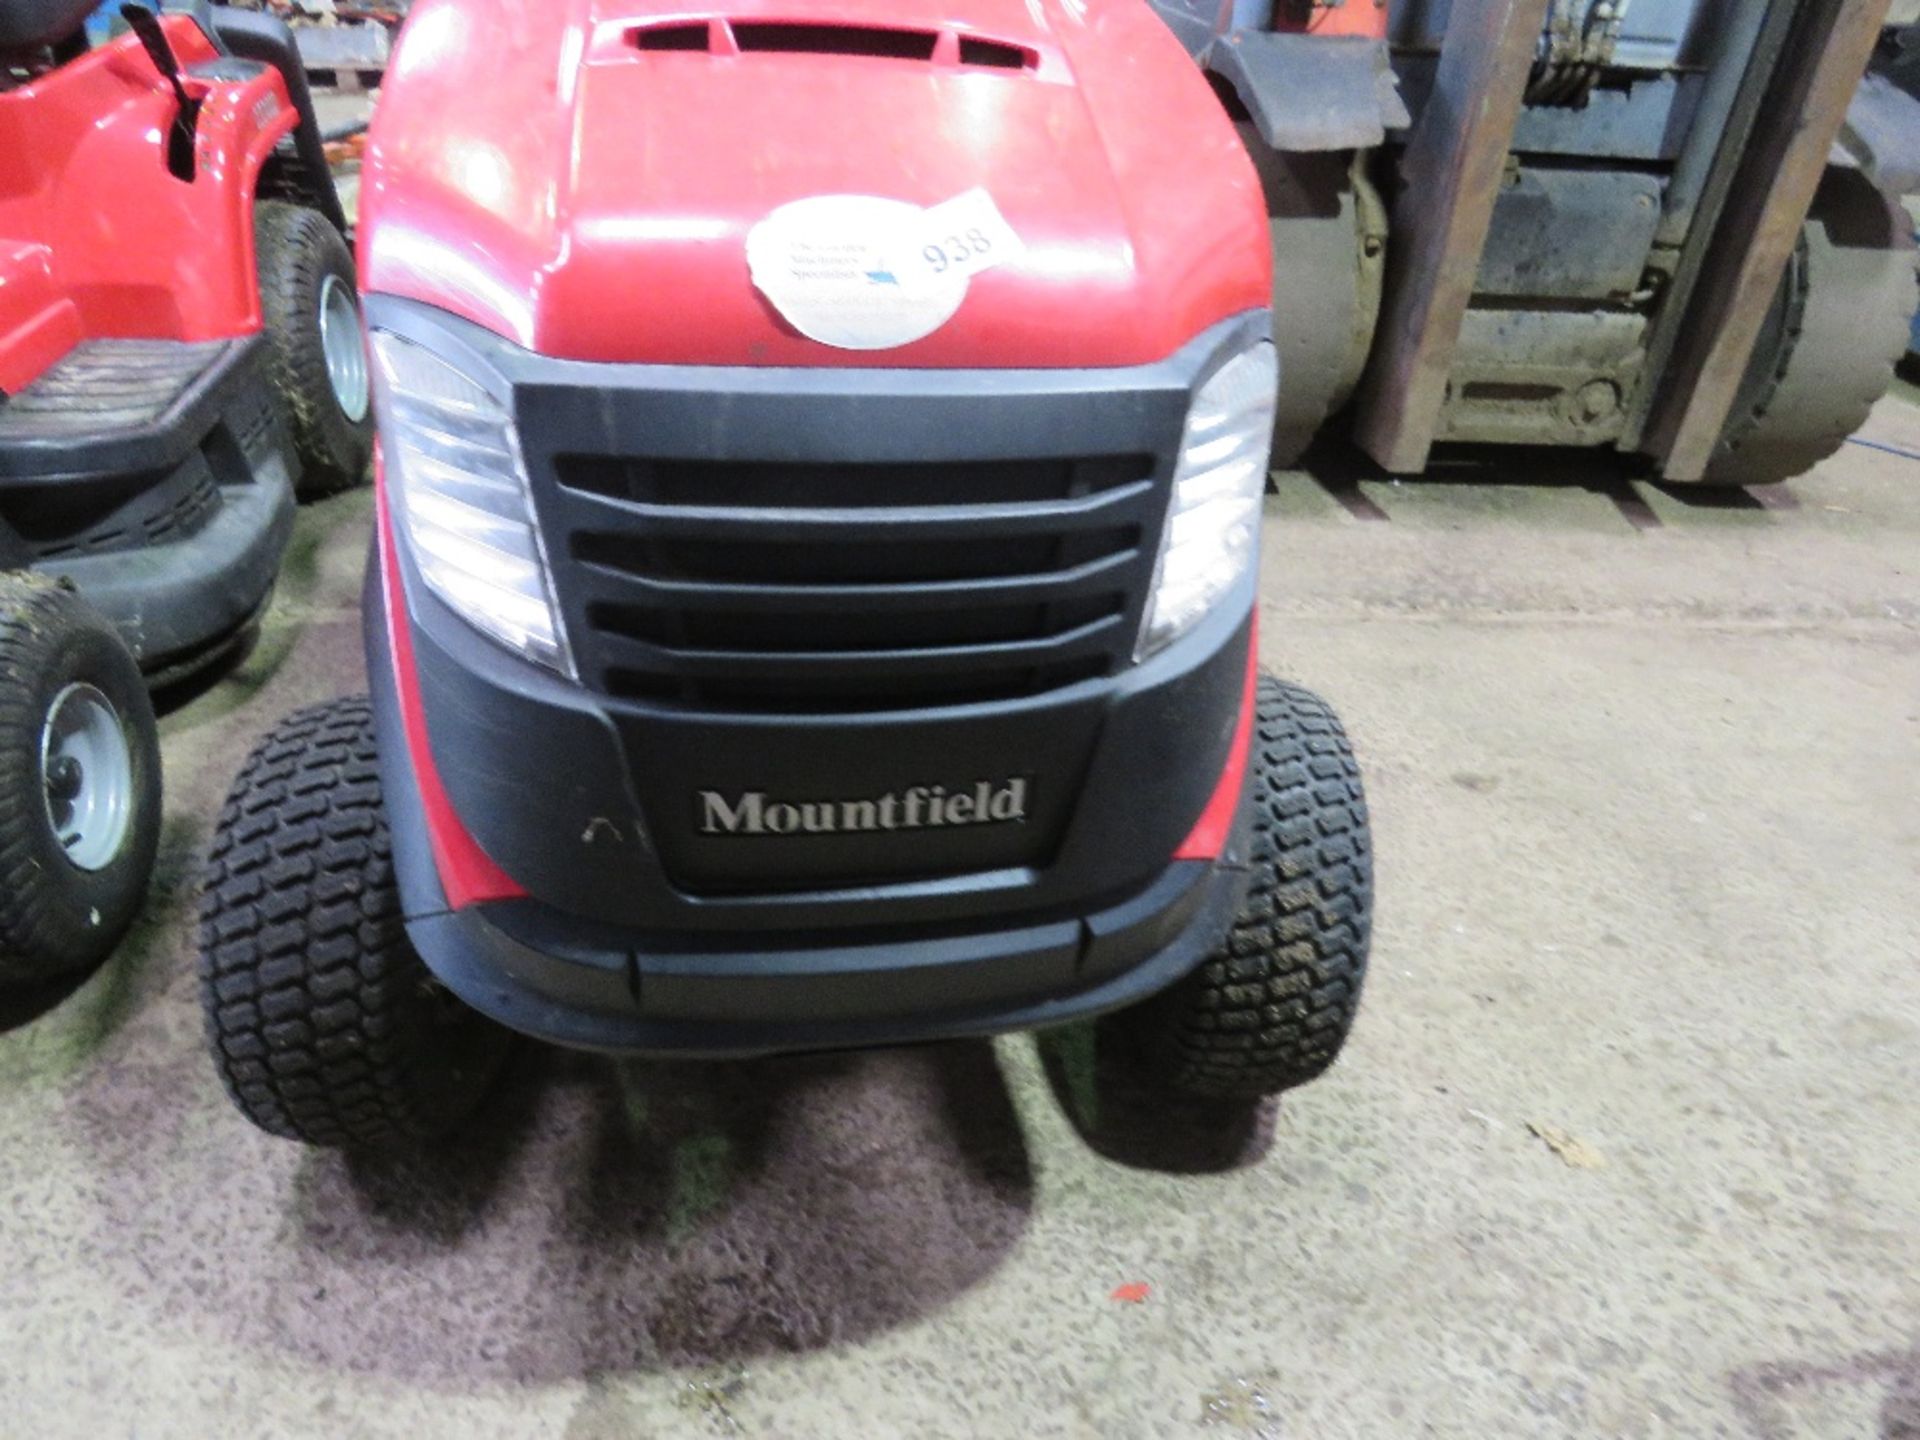 MOUNTFIELD 1636M RIDE ON MOWER WITYH COLLECTOR. WHEN TESTED WAS SEEN TO RUN AND MOWERS ENGAGED BUT D - Image 2 of 9